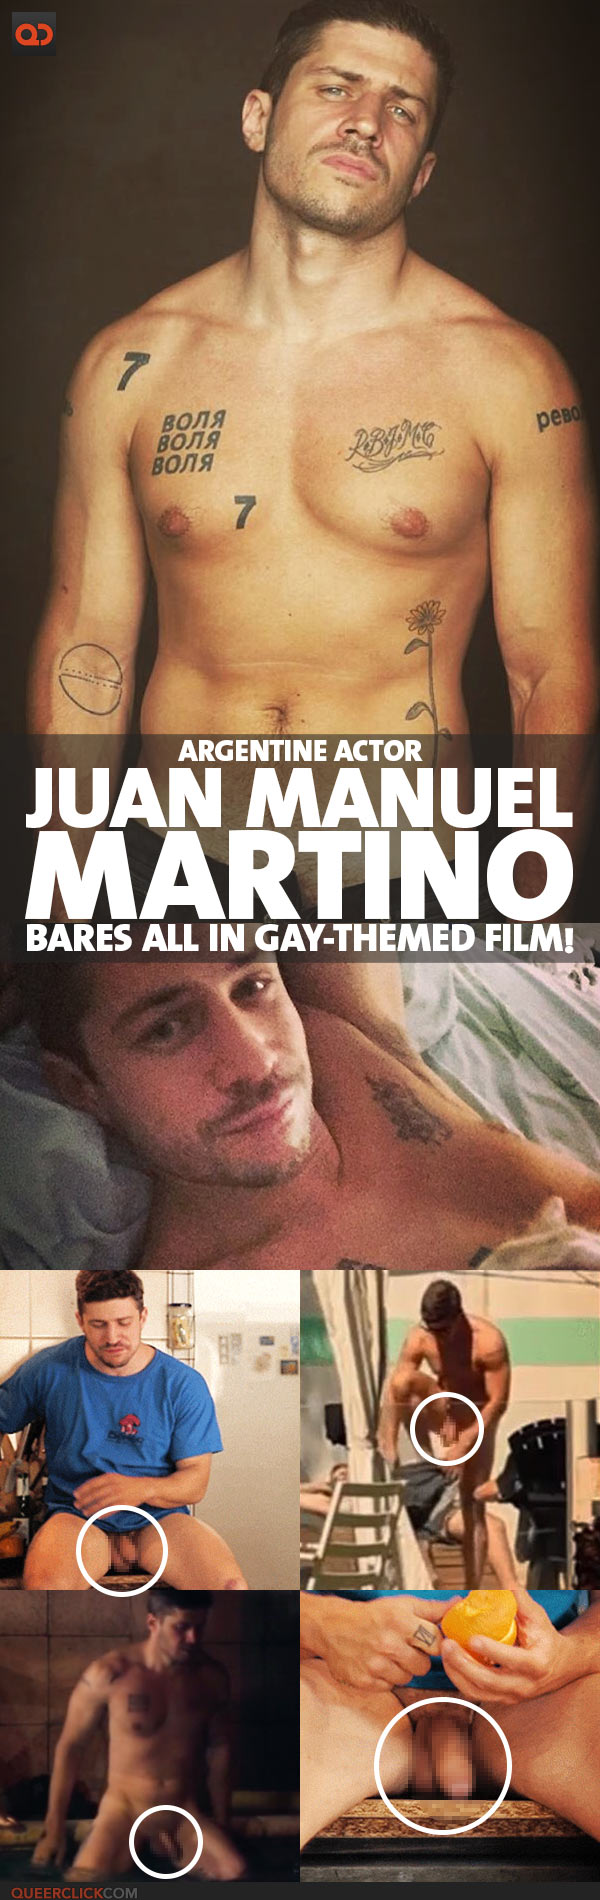 Juan Manuel Martino, Argentine Actor, Bares All In Gay-themed Film!